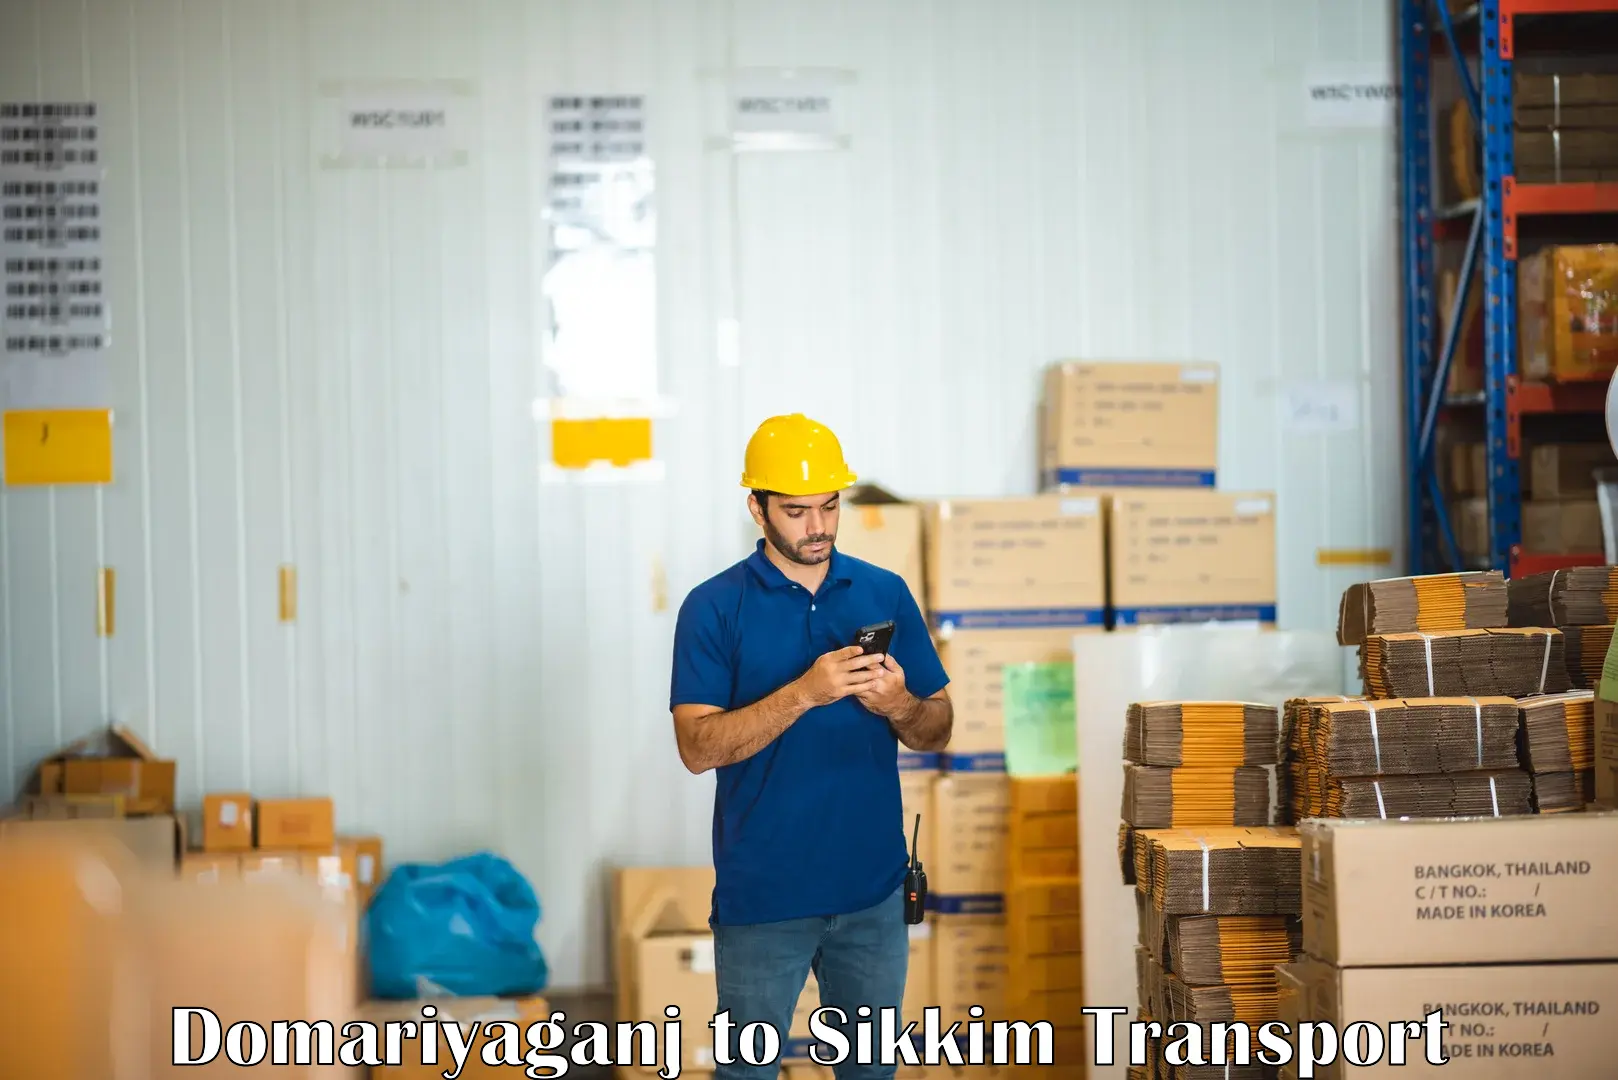 Delivery service Domariyaganj to South Sikkim